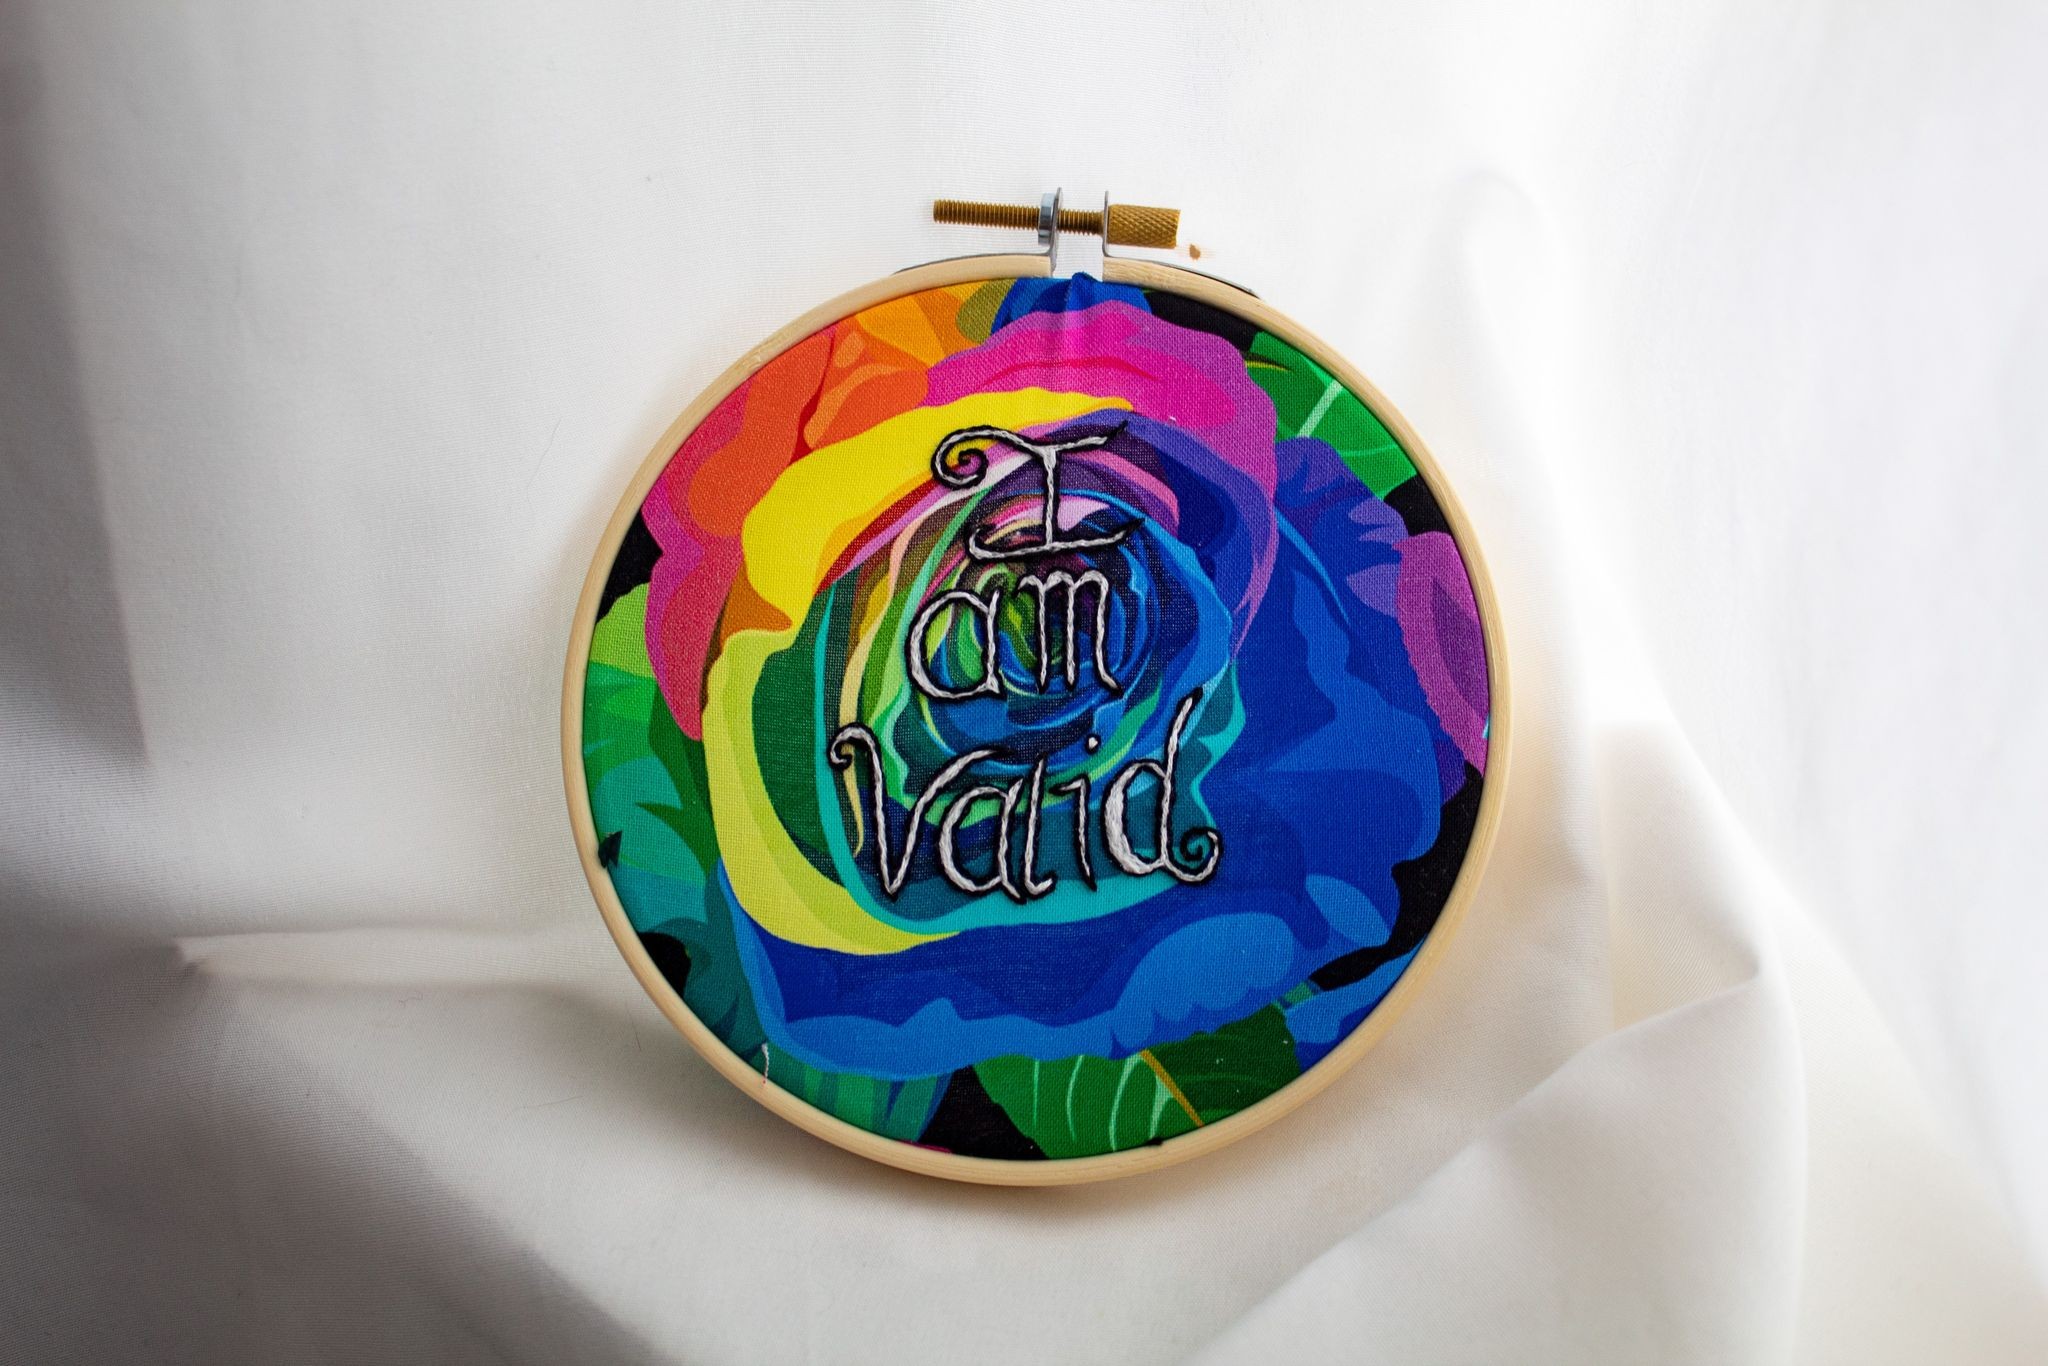 Product image of an embroidery featuring the words "I am valid"  in white thread with black outline embroidered over  rainbow-coloured rose-printed fabric, the whole in a wooden hoop and set against a white fabric backdrop